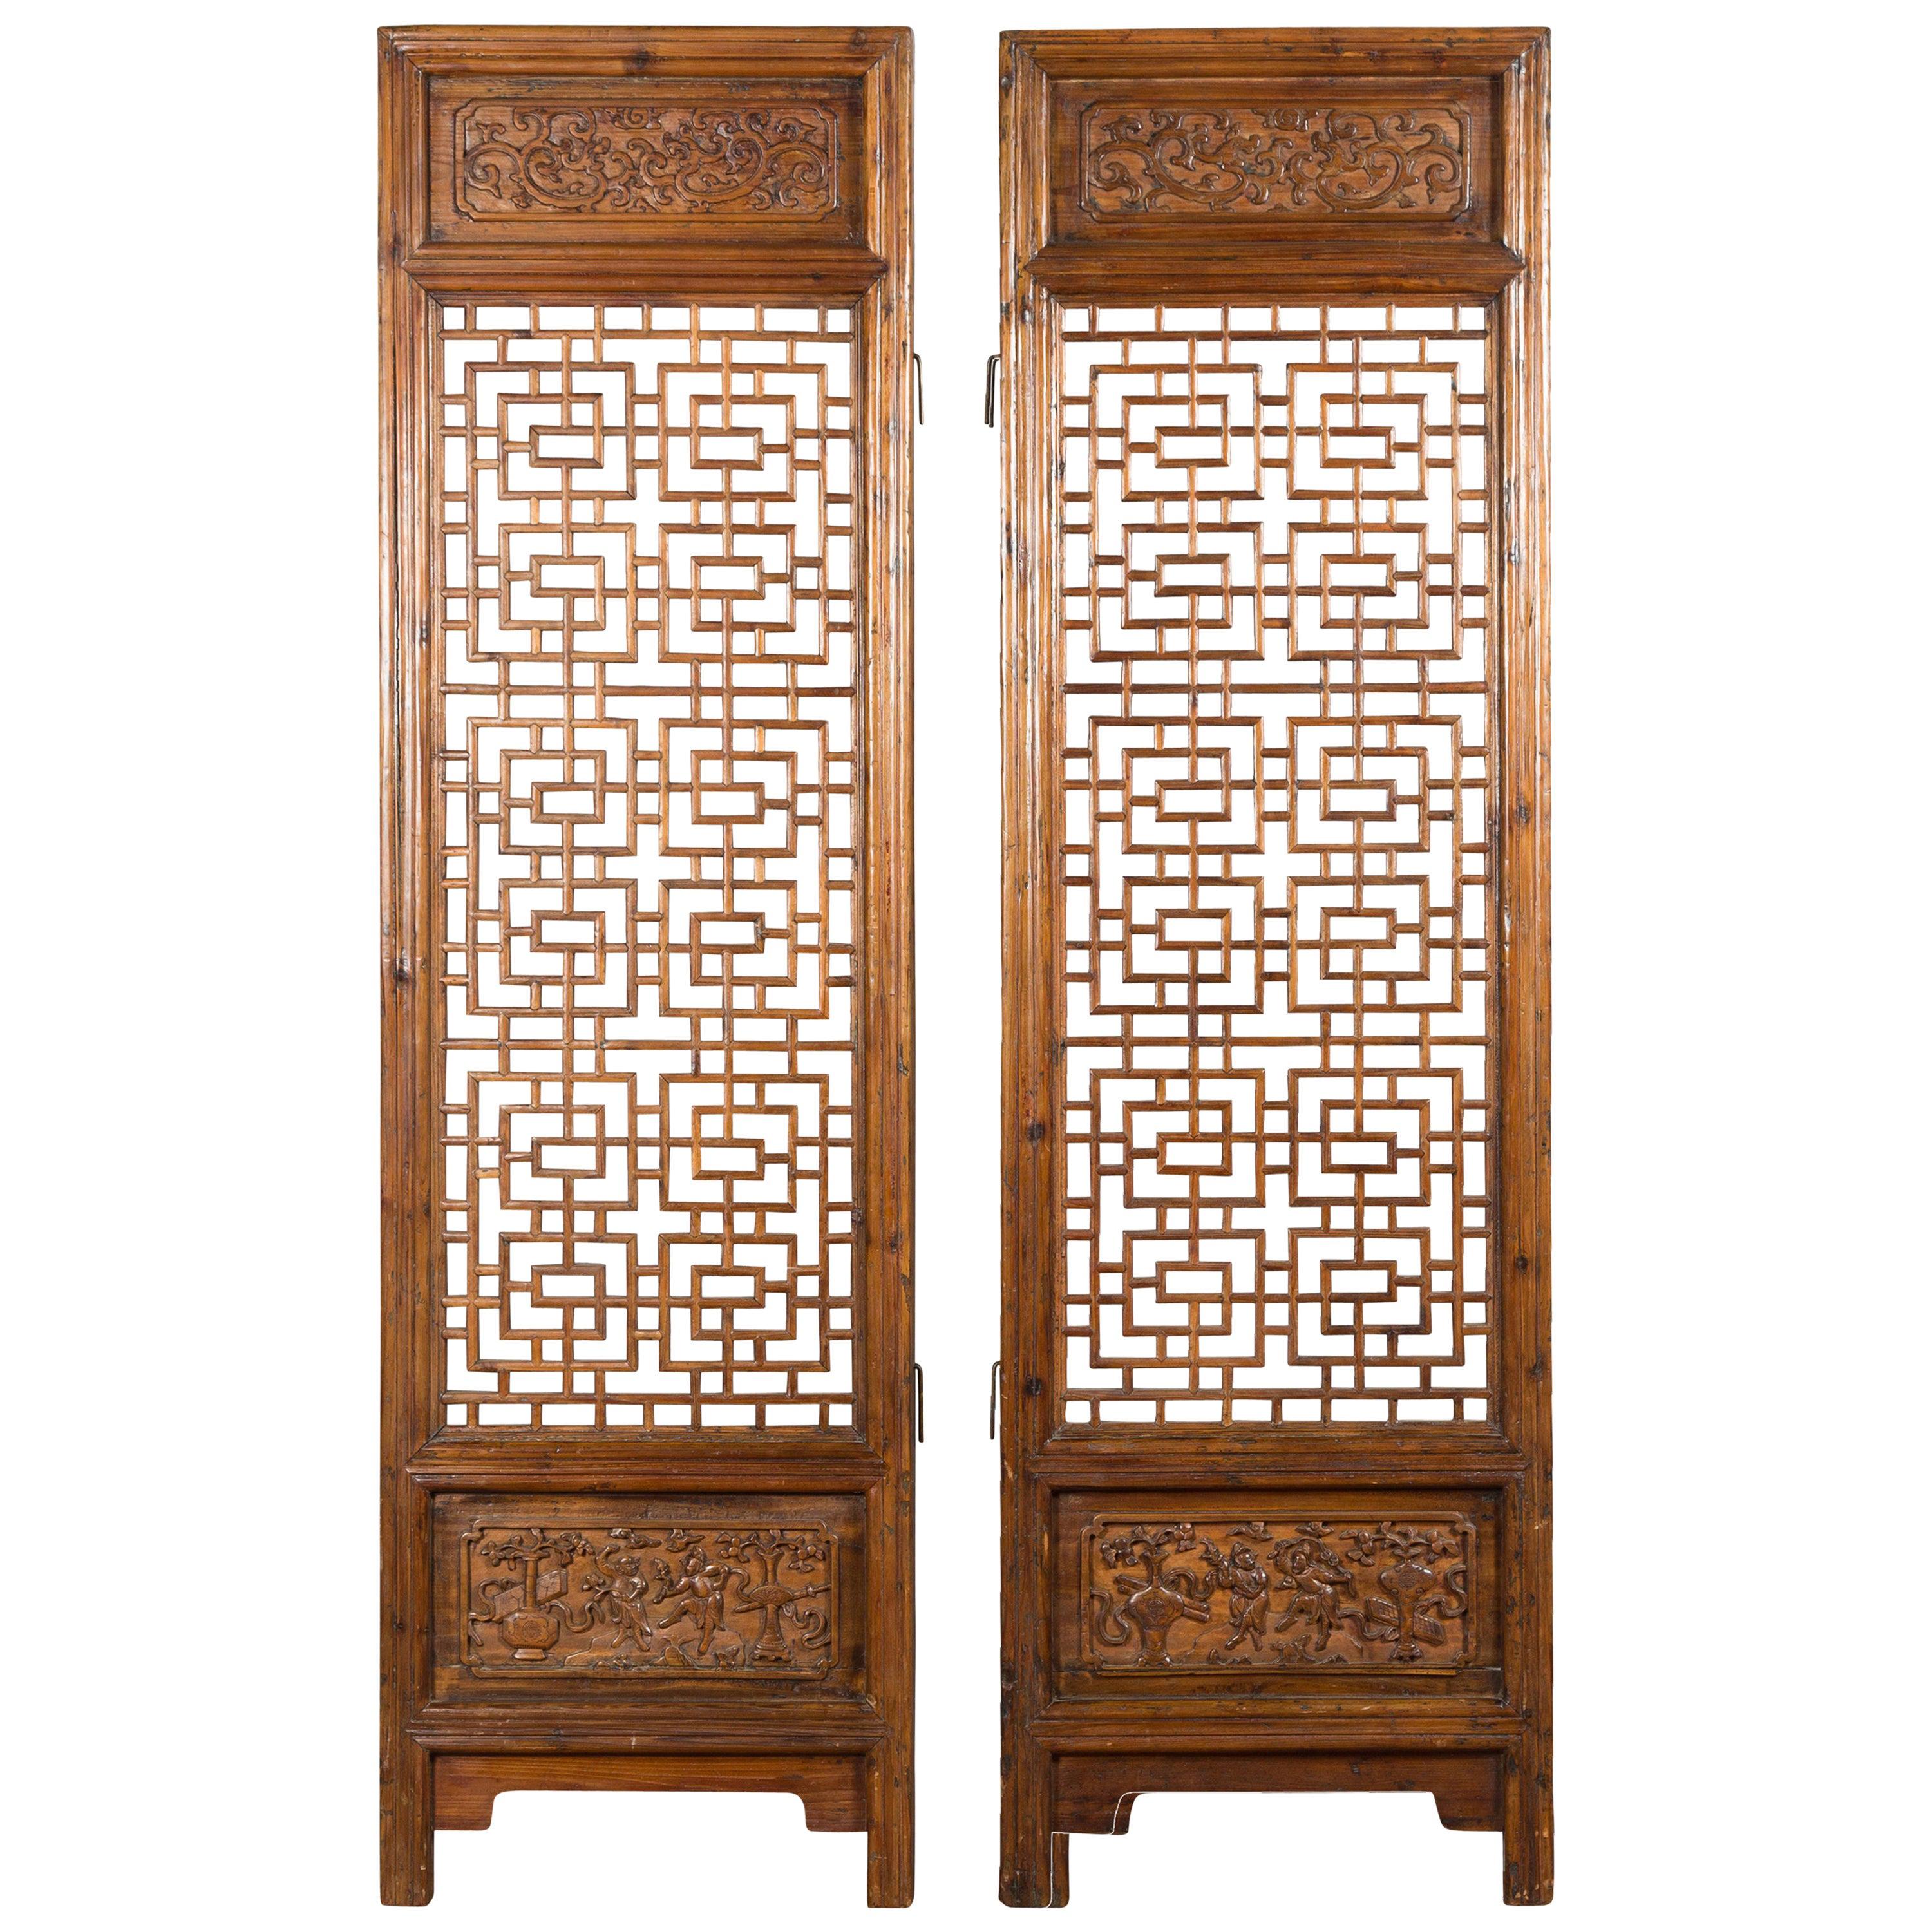 Pair of Chinese 19th Century Screens with Fretwork and Low-Relief Carved Panels